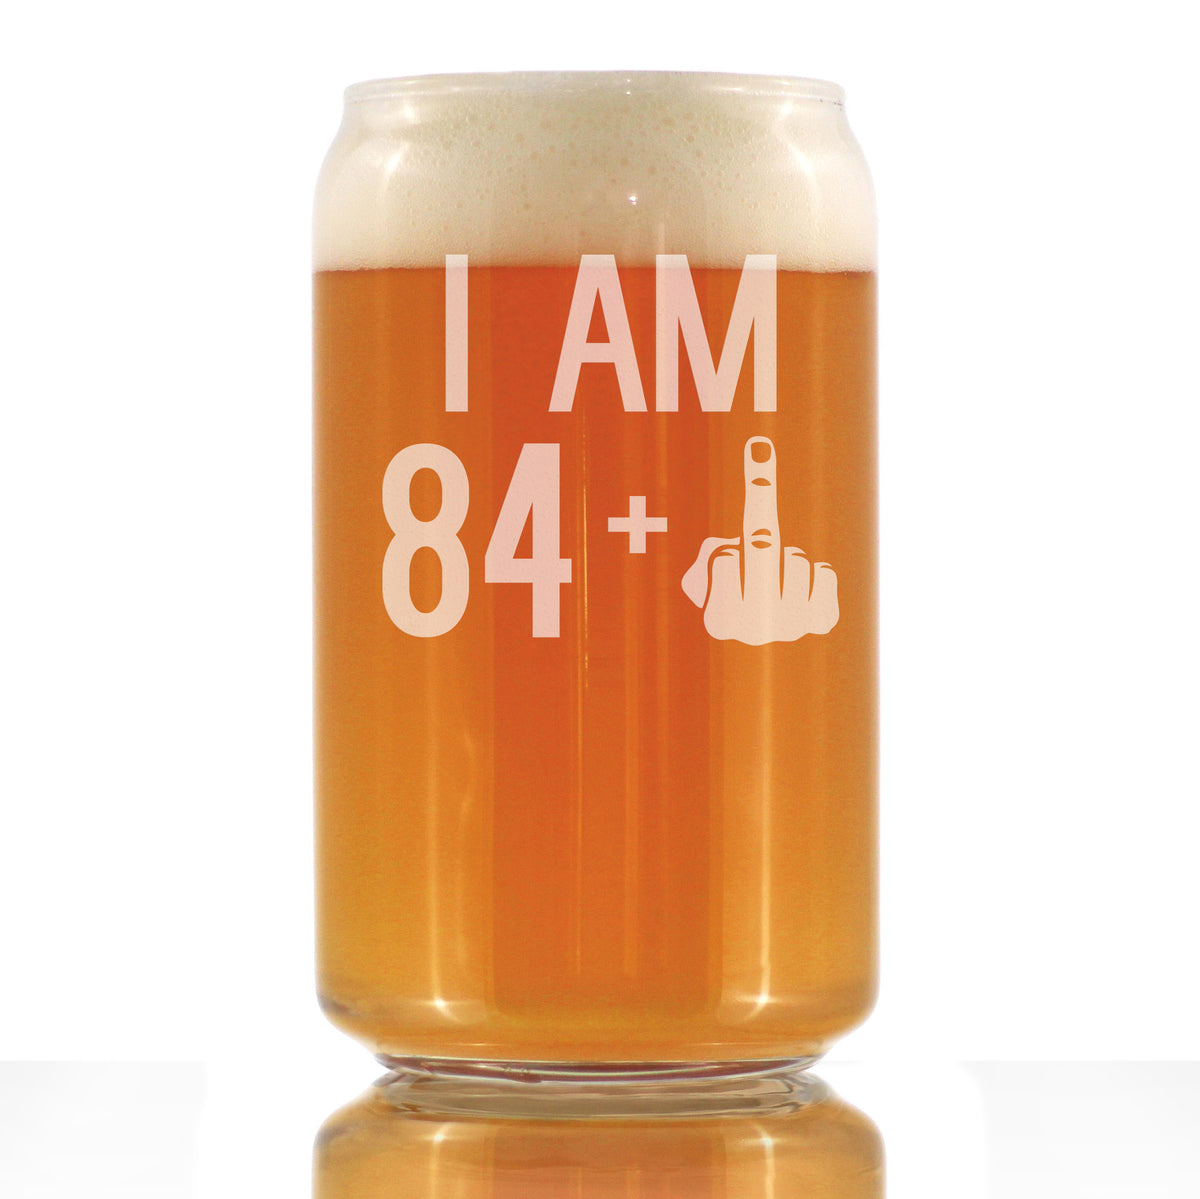 84 + 1 Middle Finger - 16 Ounce Beer Can Pint Glass